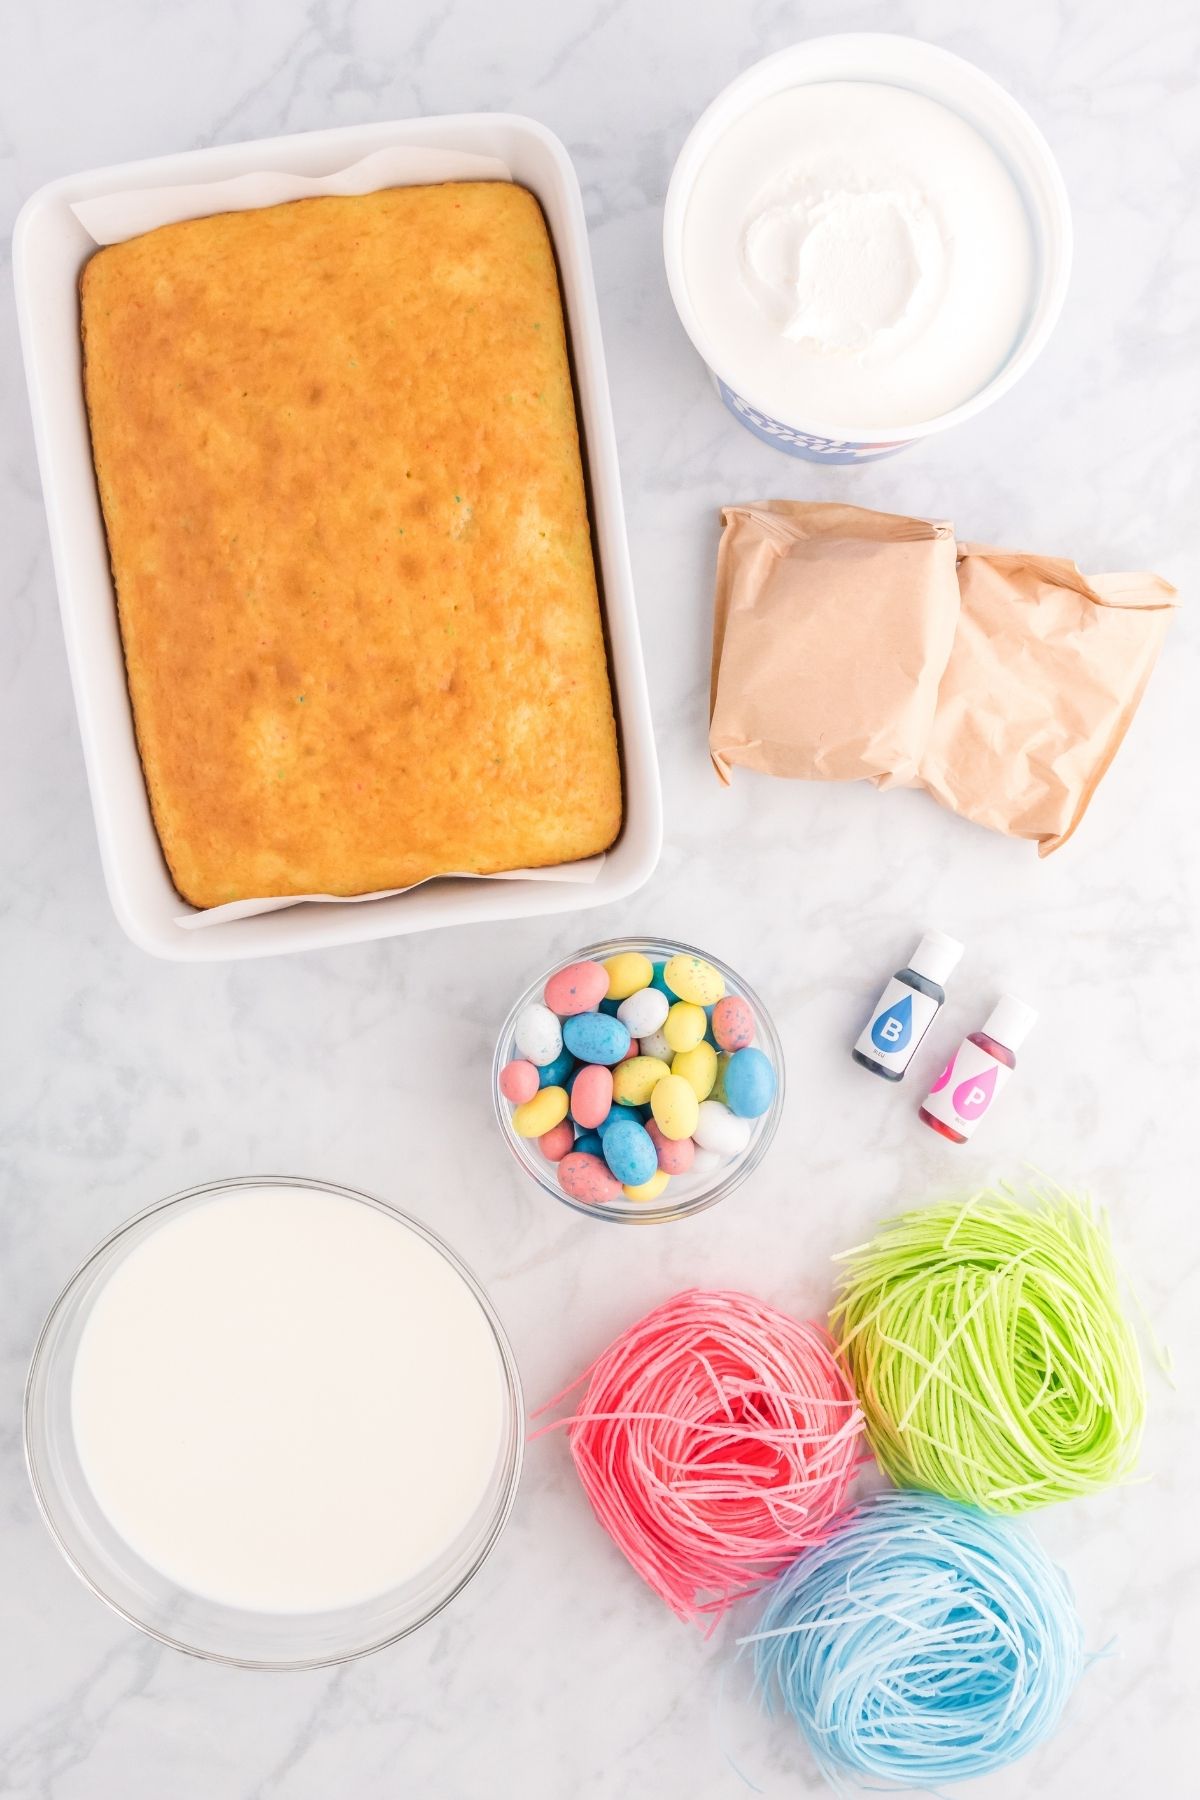 ingredients on white counter: baked rainbow cake, pudding packets, milk, food coloring, edible candy grass, Easter egg candies